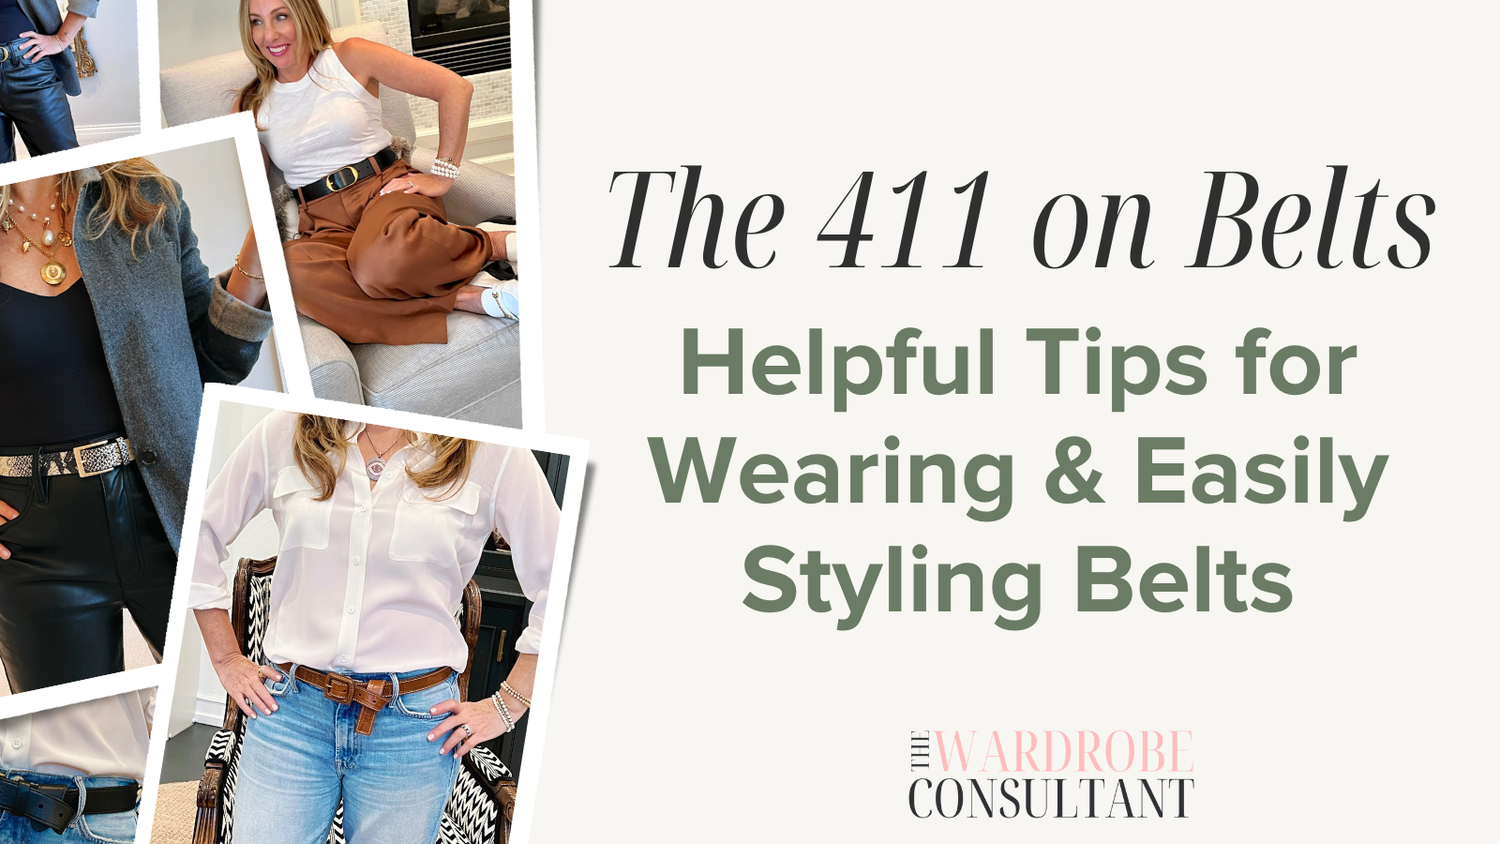 Hver uge udføre justere The 411 on Belts: Helpful Tips for Wearing Belts and Easily Styling Them —  The Wardrobe Consultant